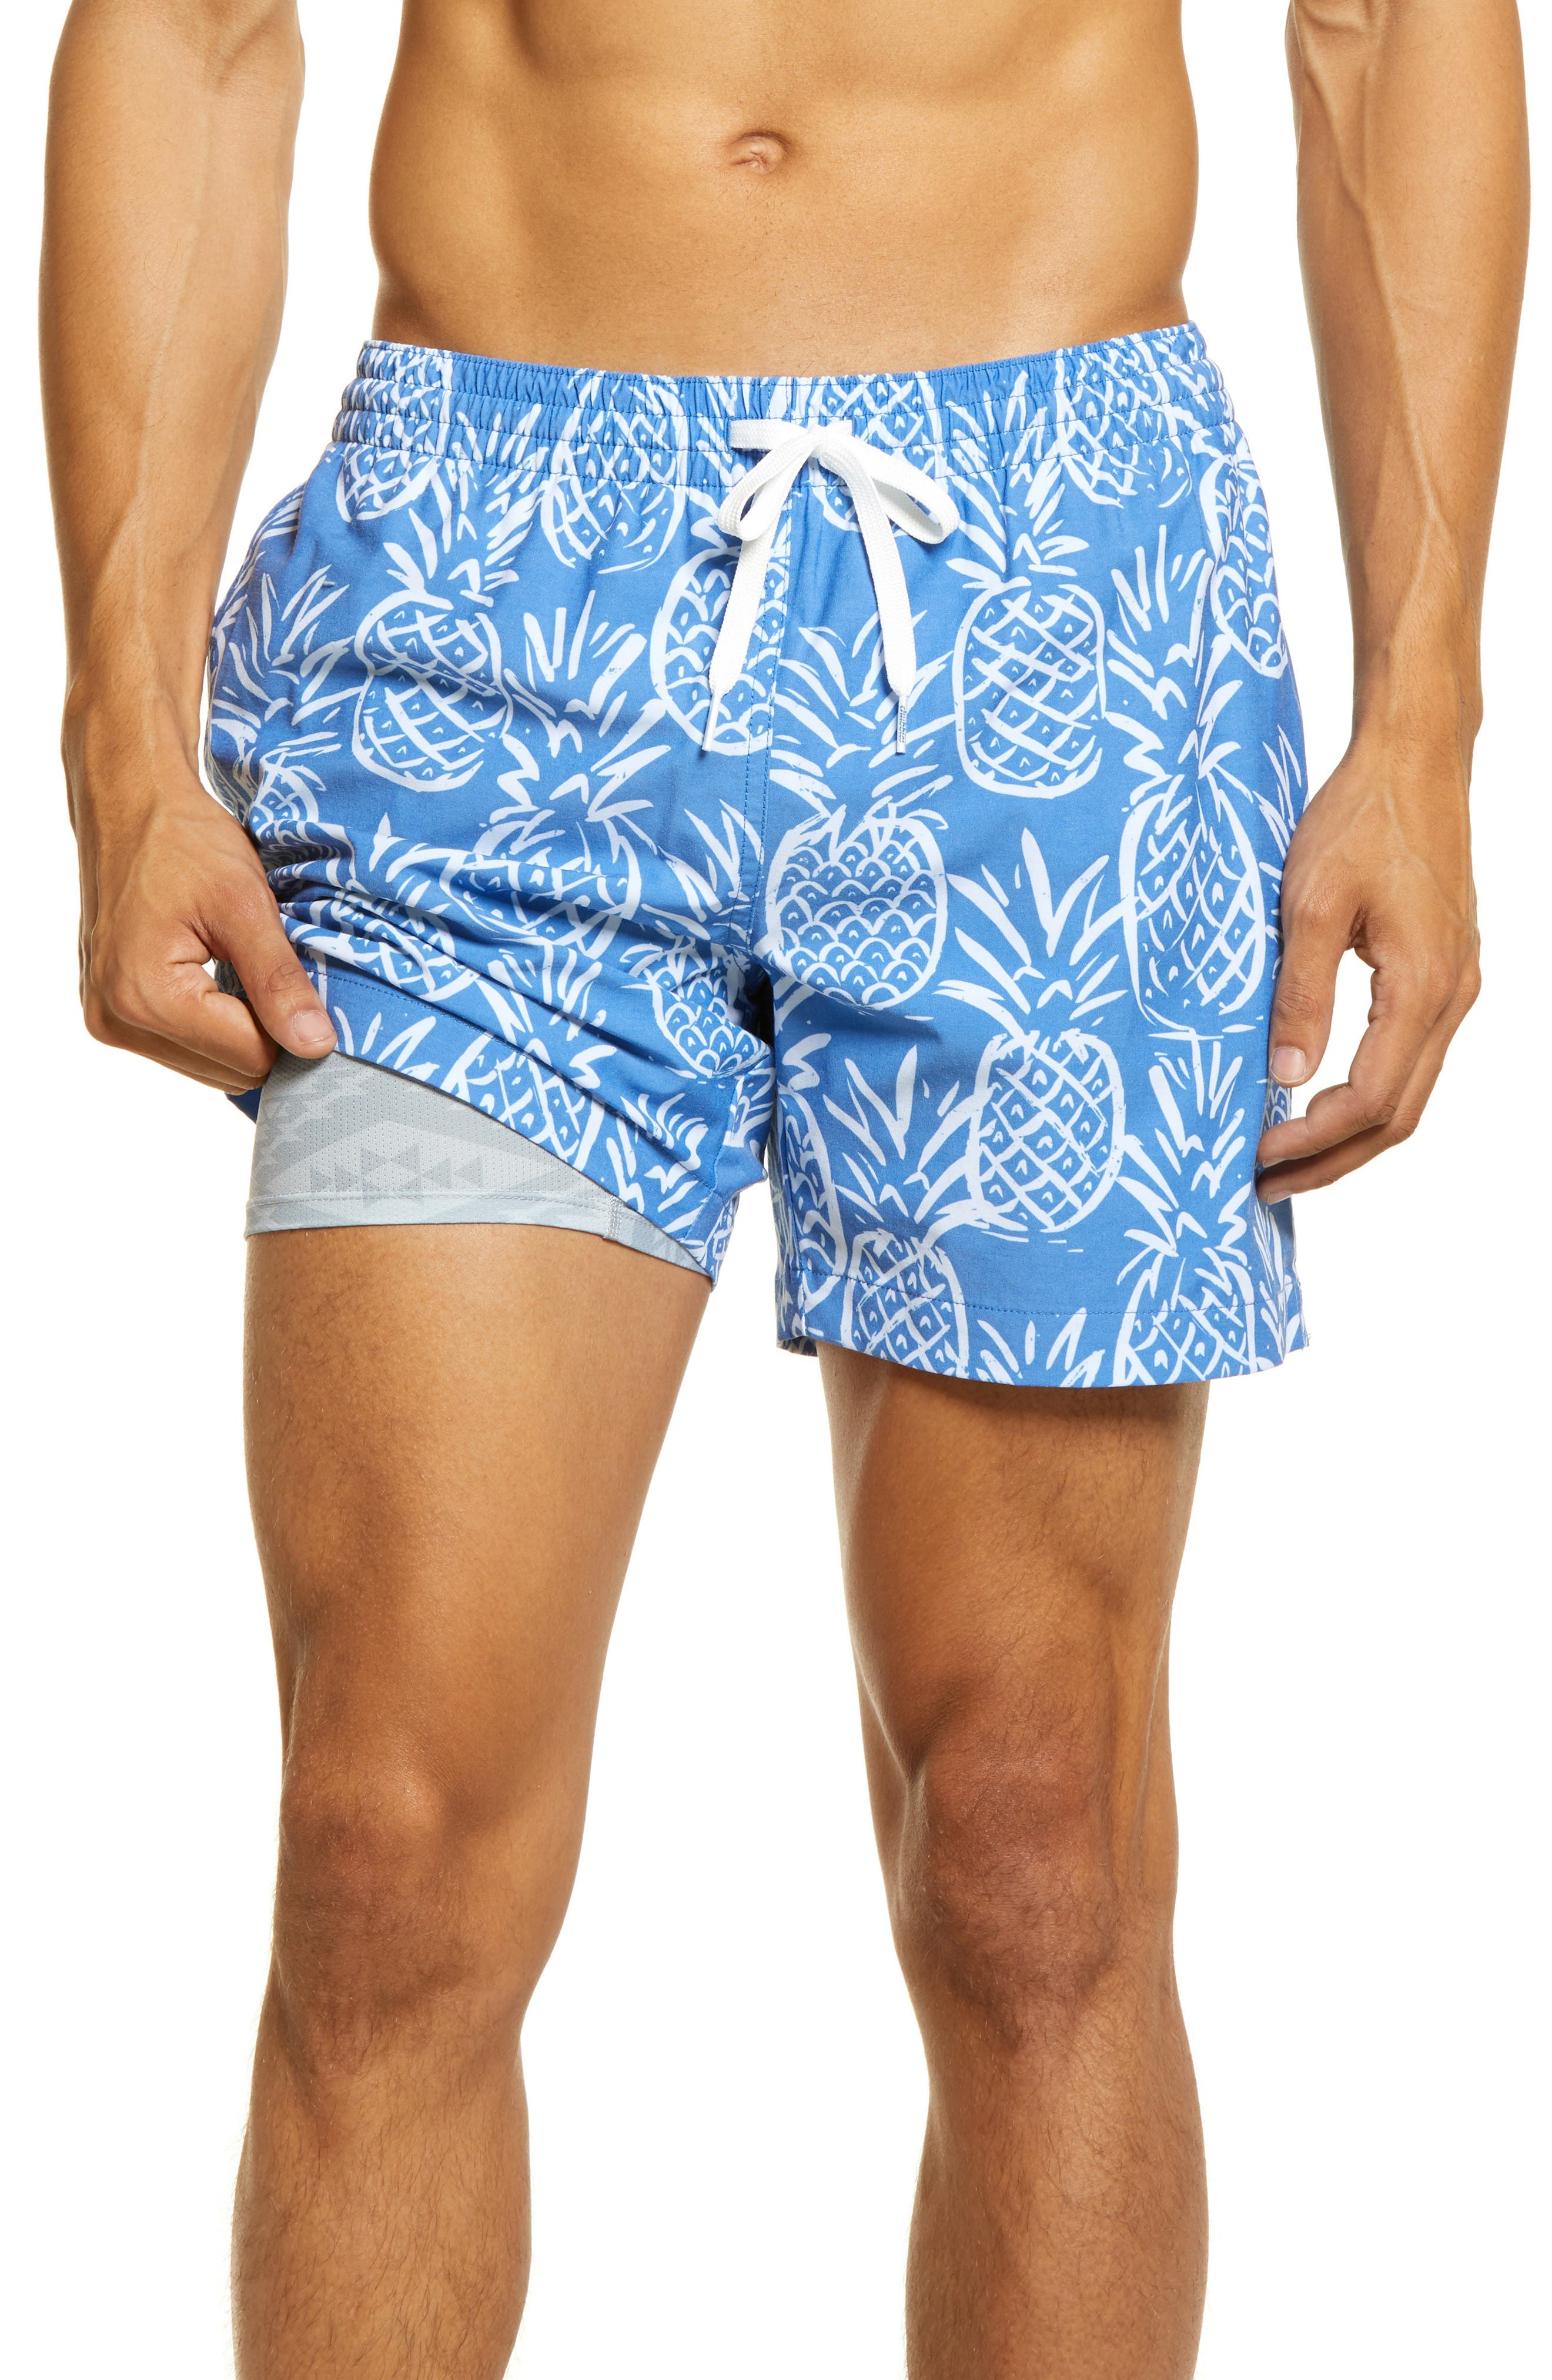 Mens Black and White Anchors Swimming Trunk Surf Shorts Beach Swimsuits